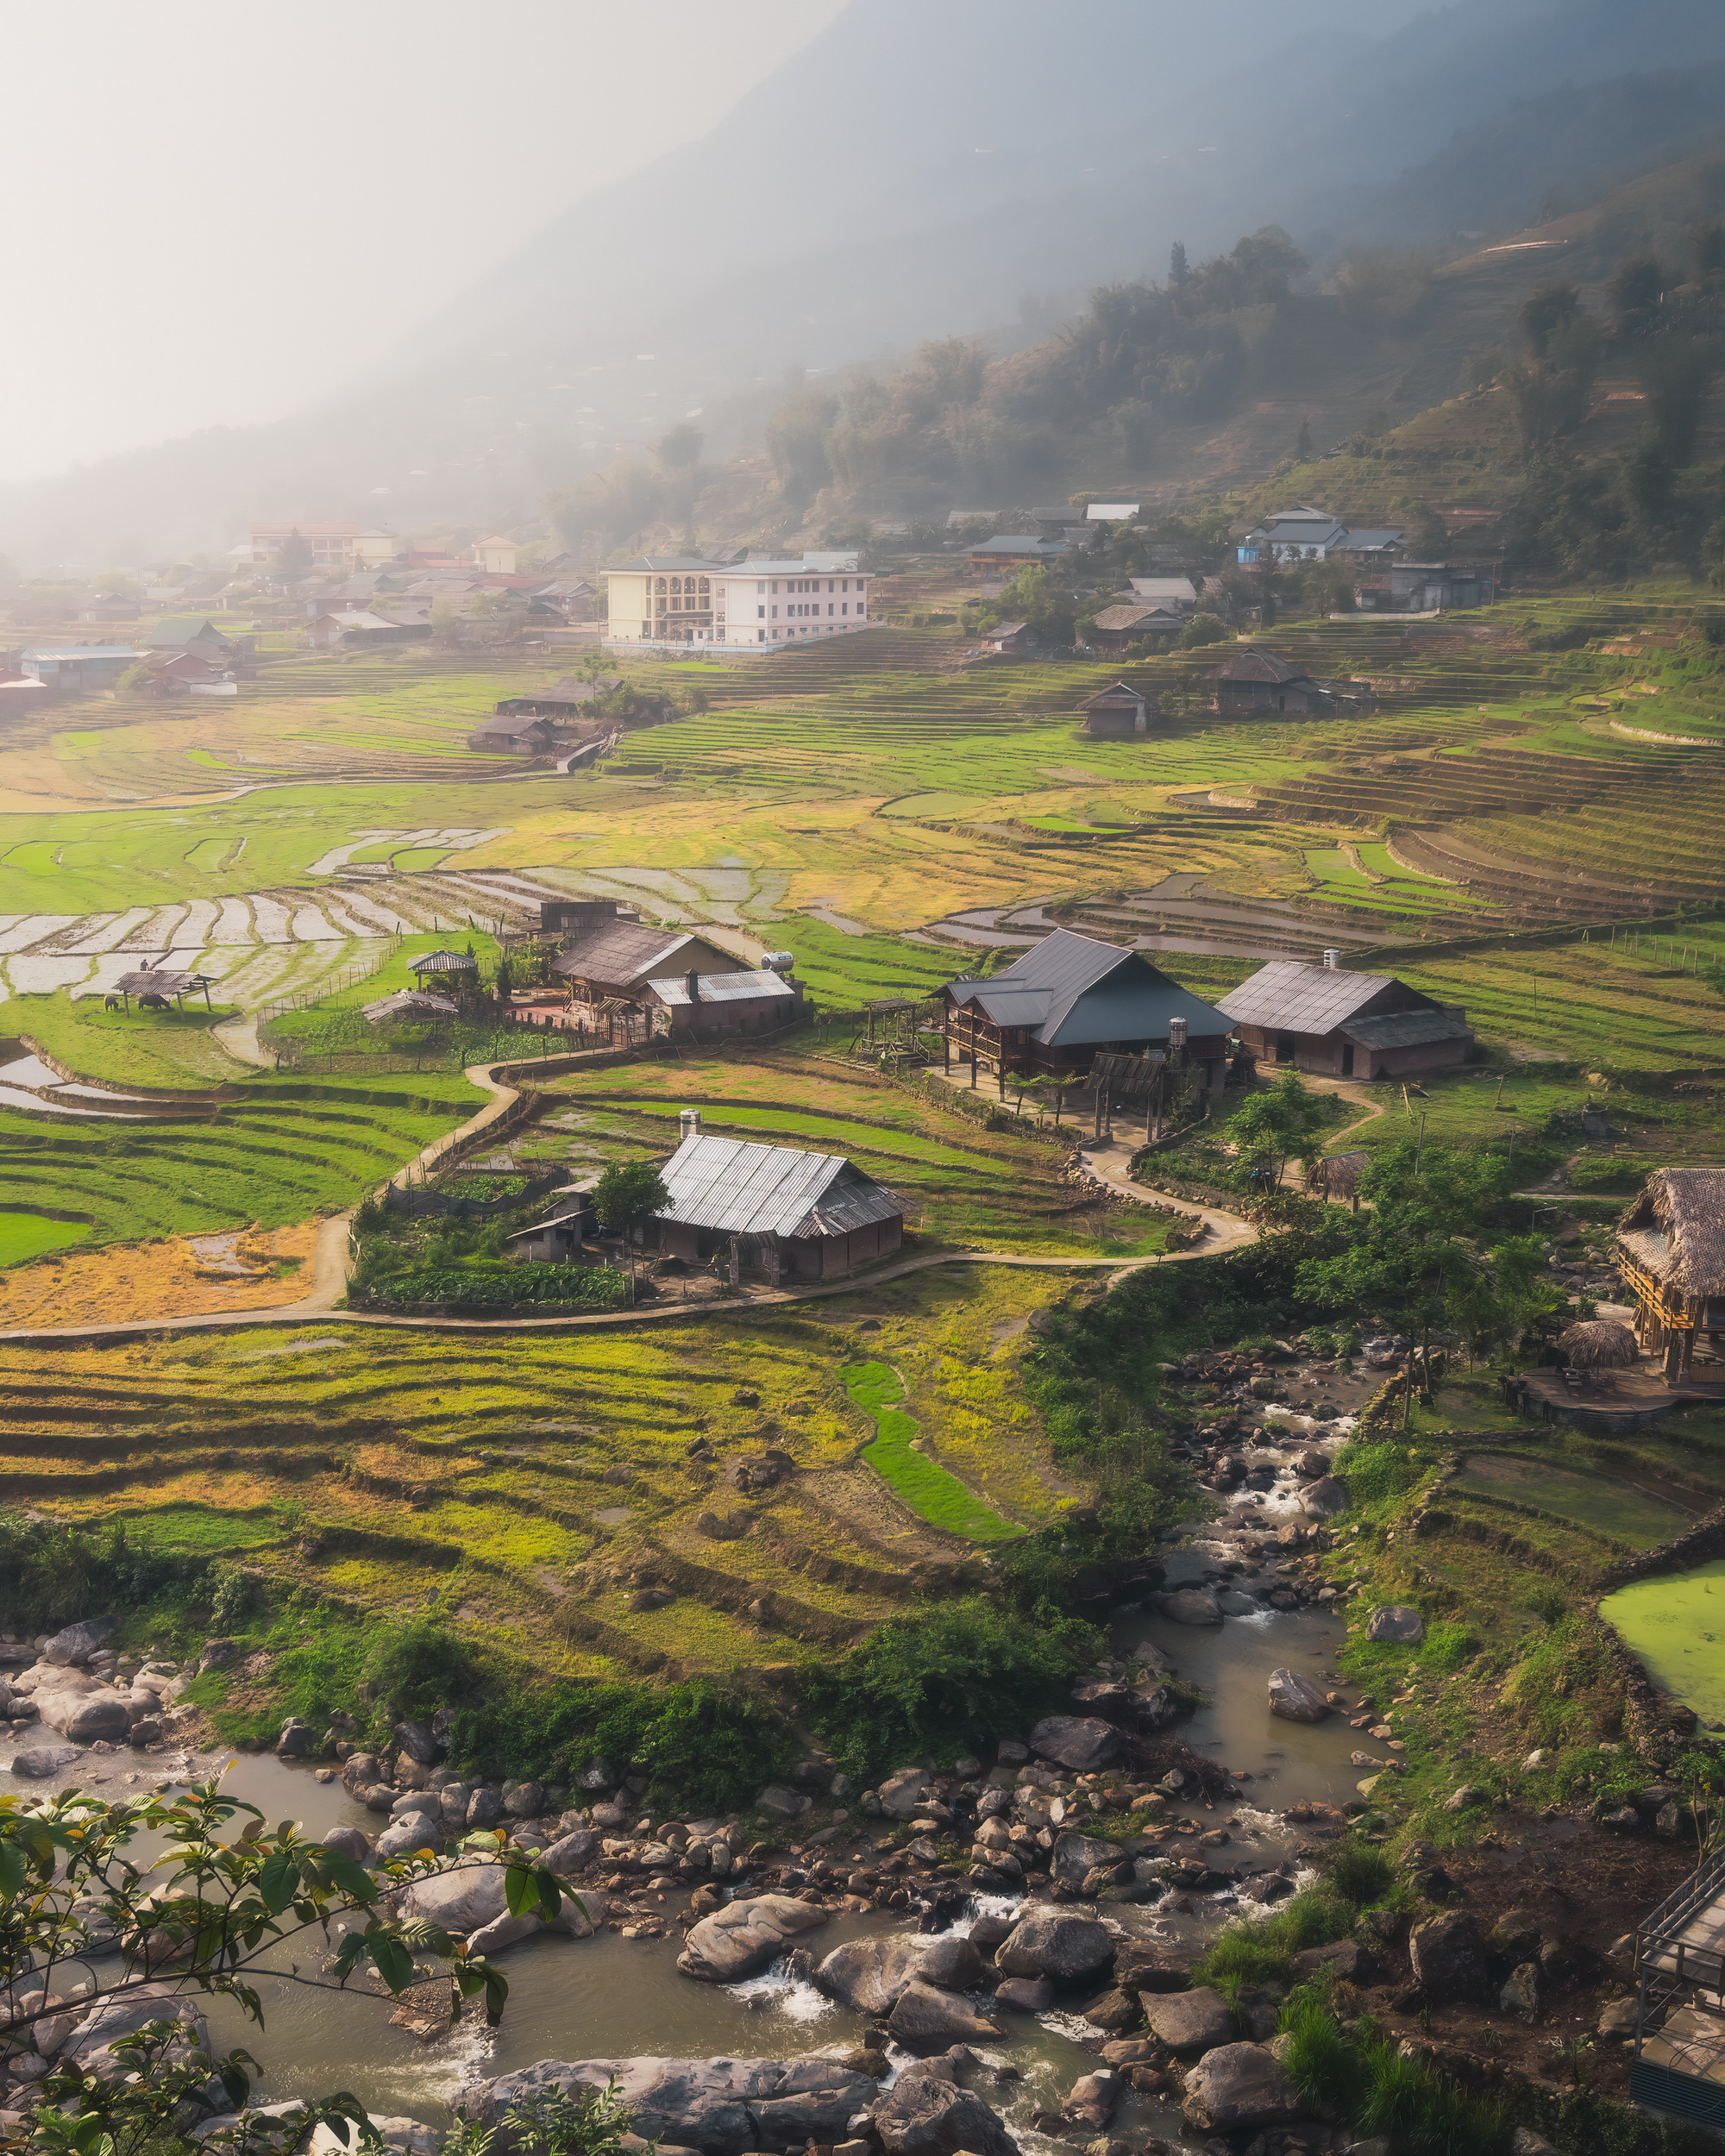 A local village in Sa Pa Town, Lao Cai Province, northern Vietnam. Photo taken by Harry Bradley